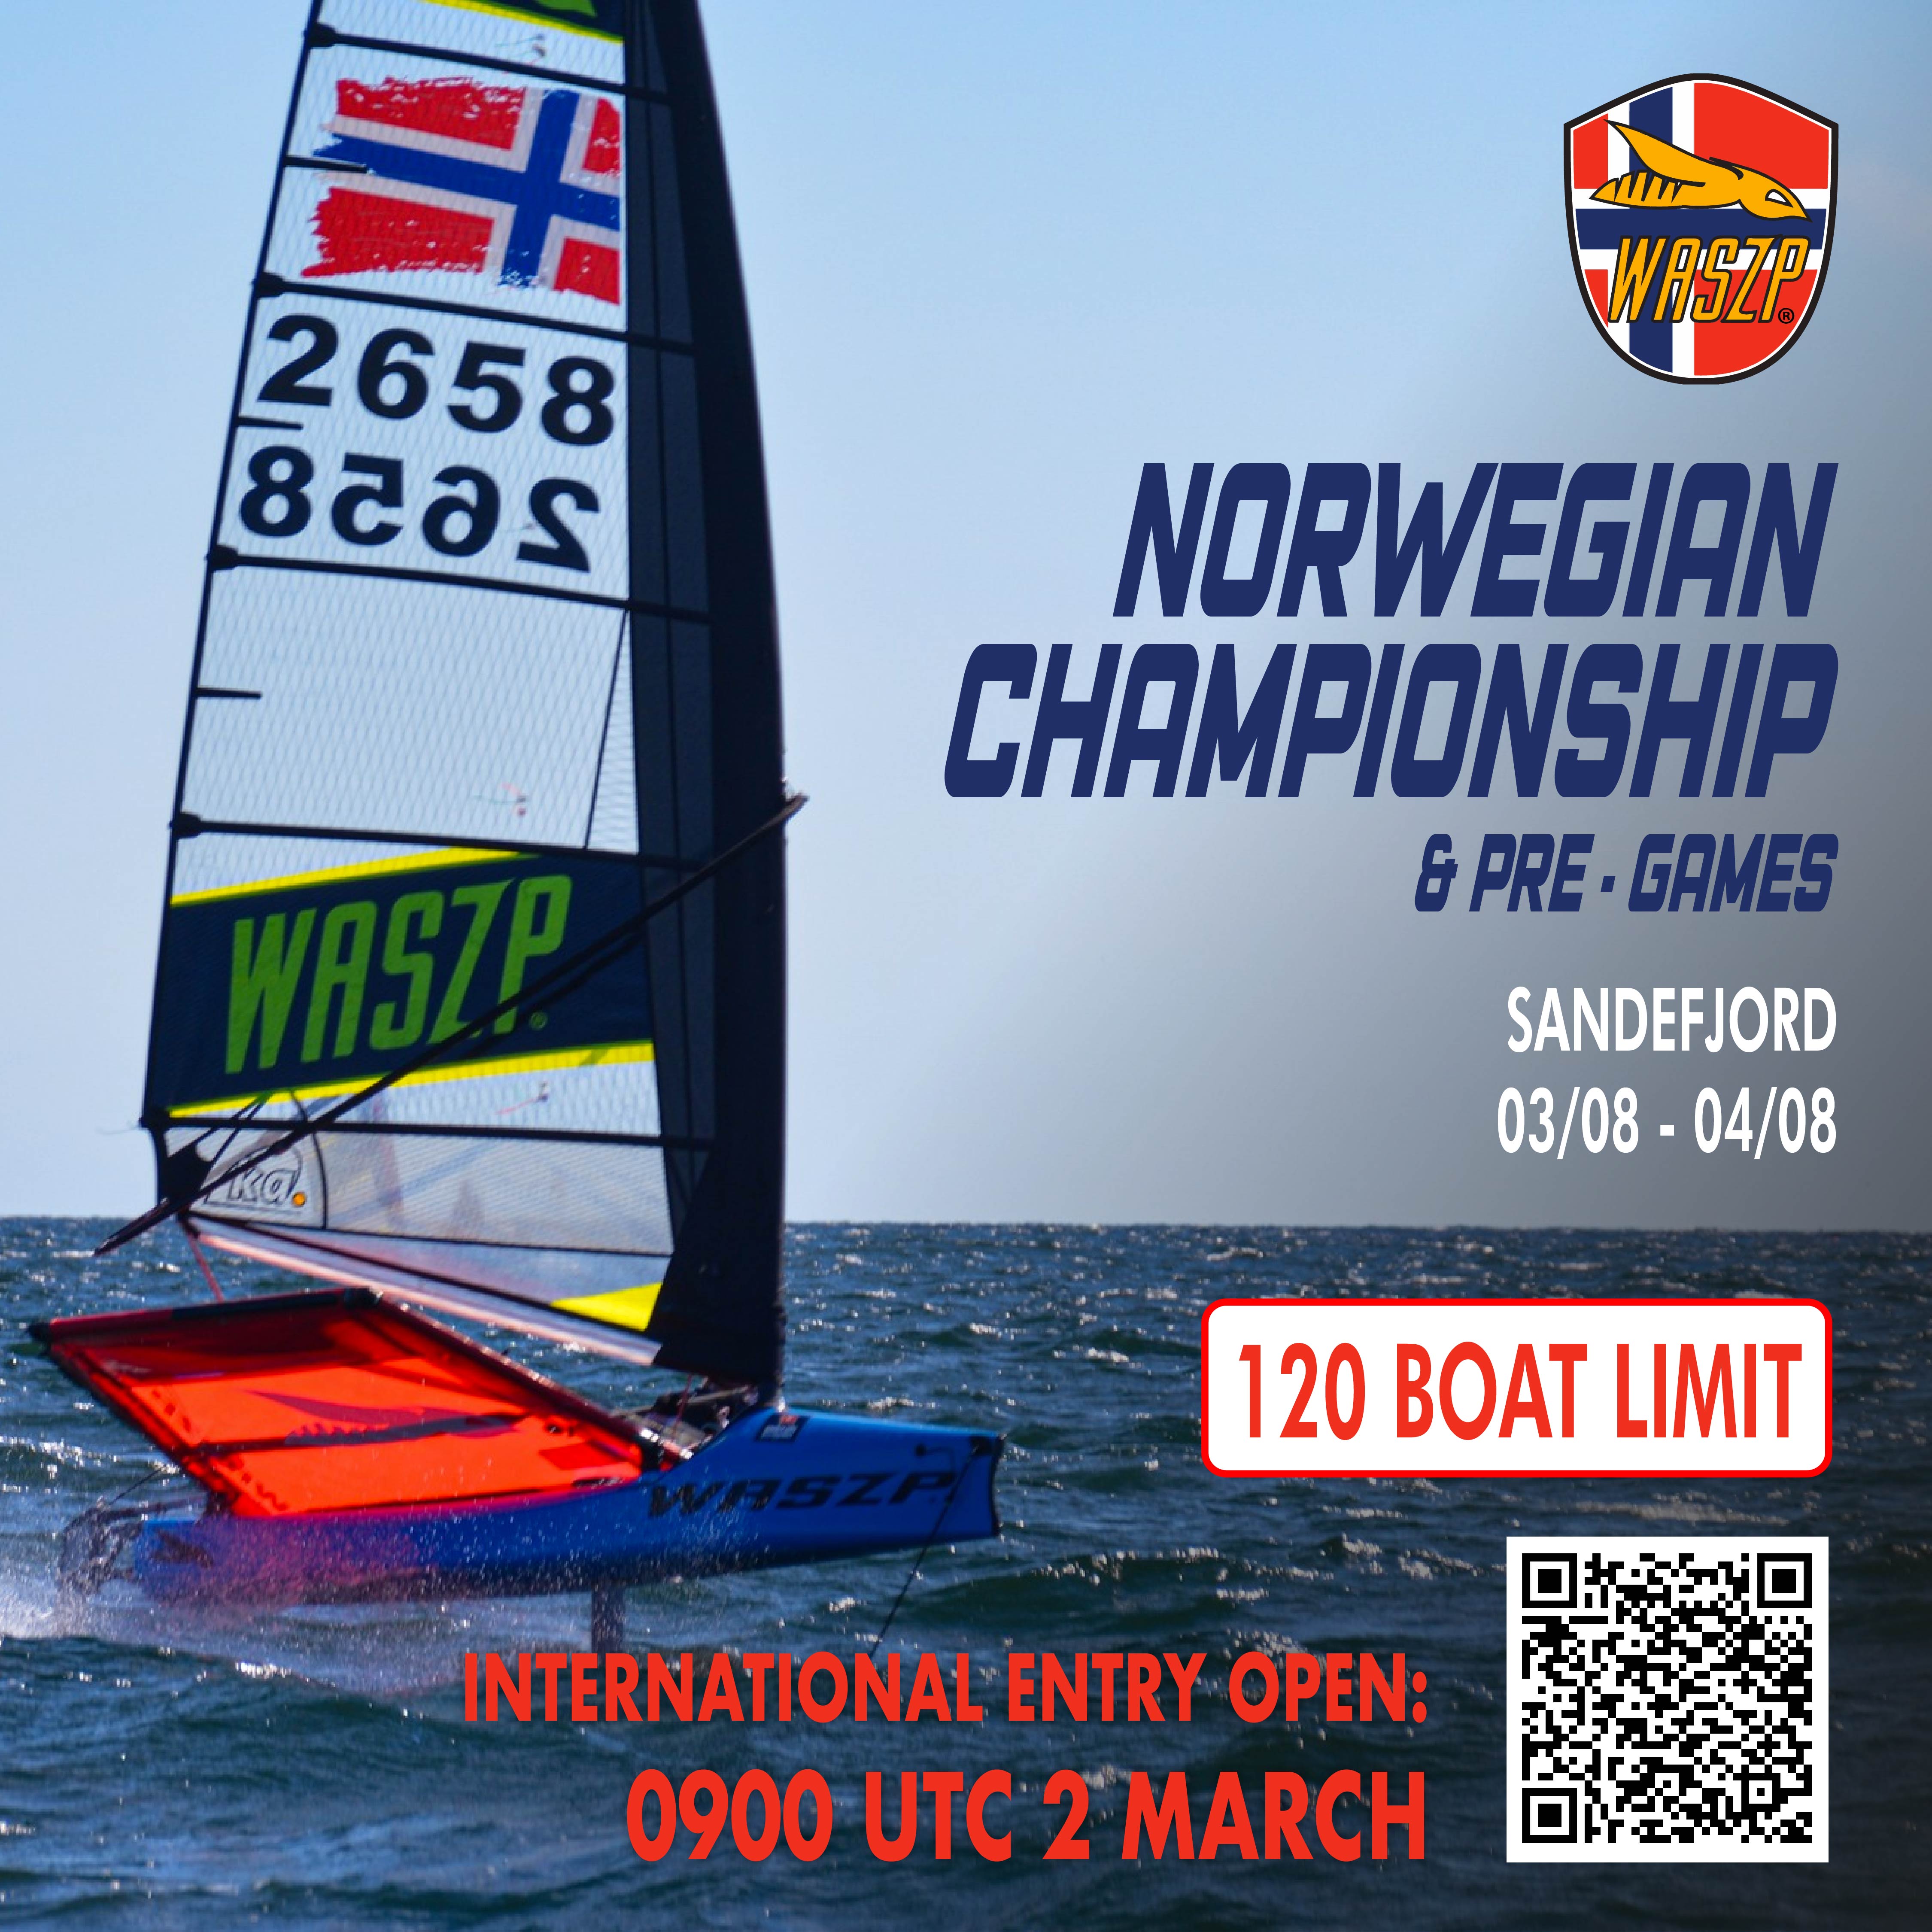 Norwegian Championship and Pre-Games